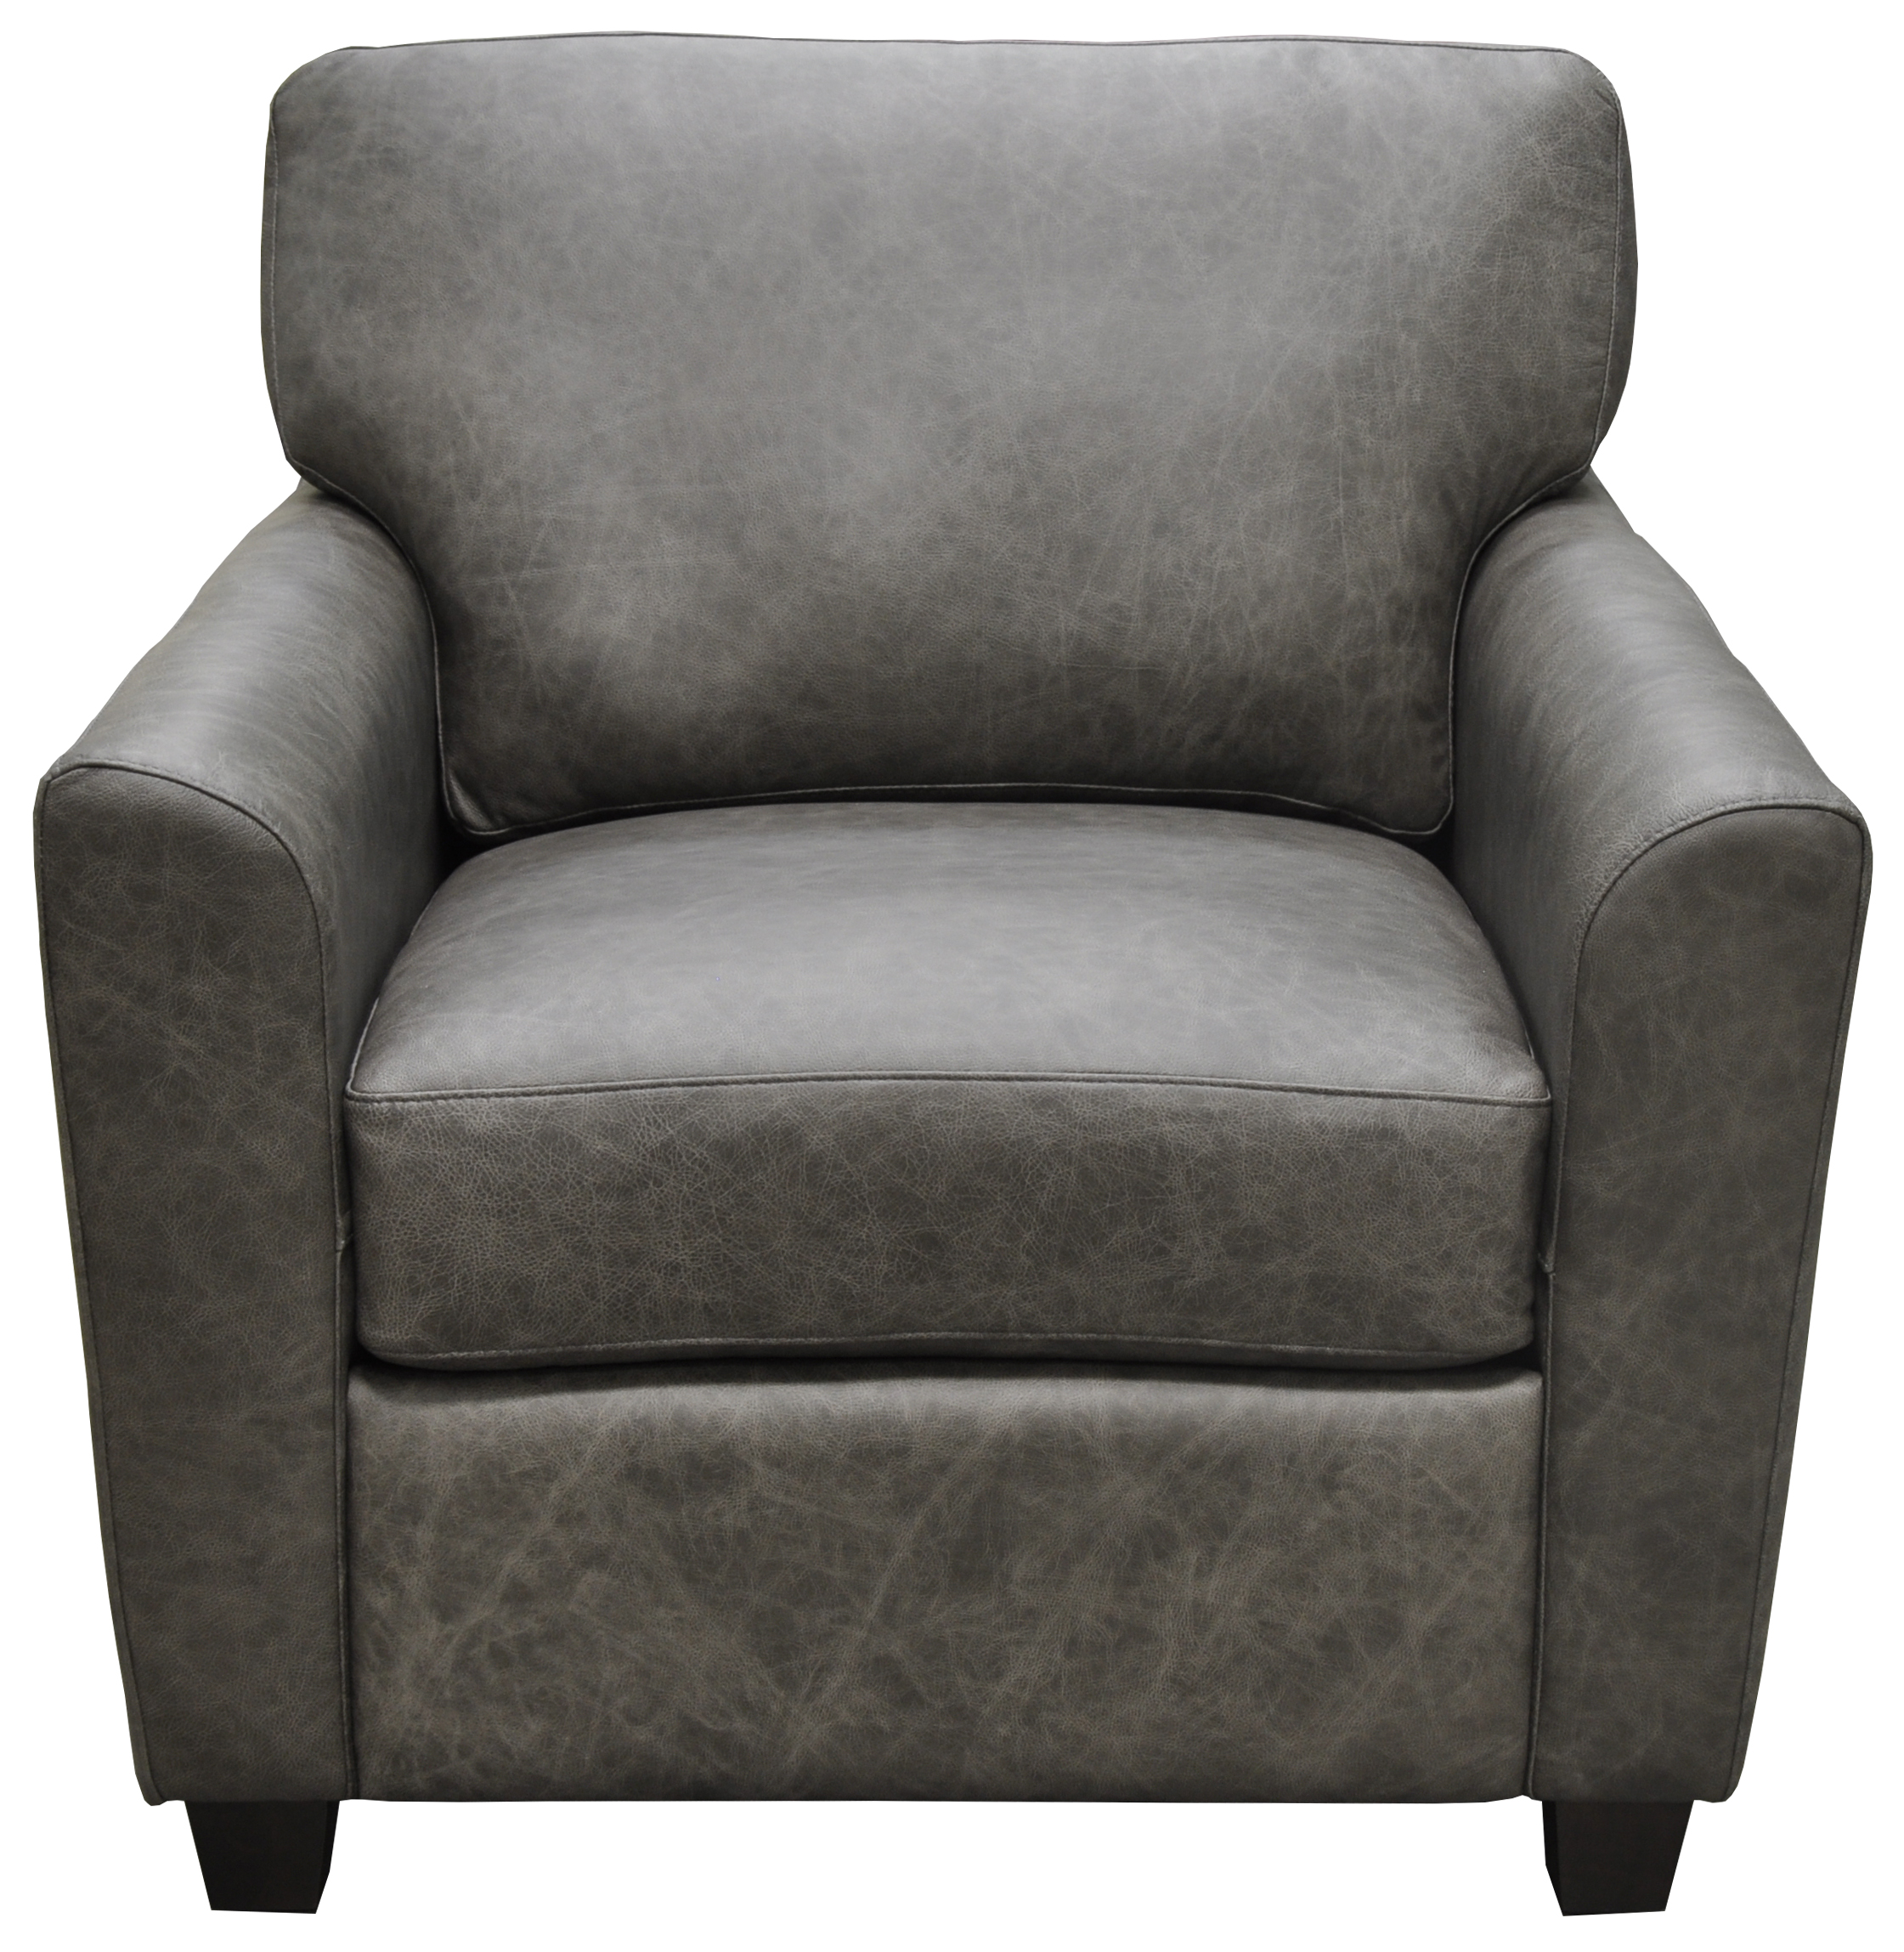 Stationary Solutions 202 Accent Chair